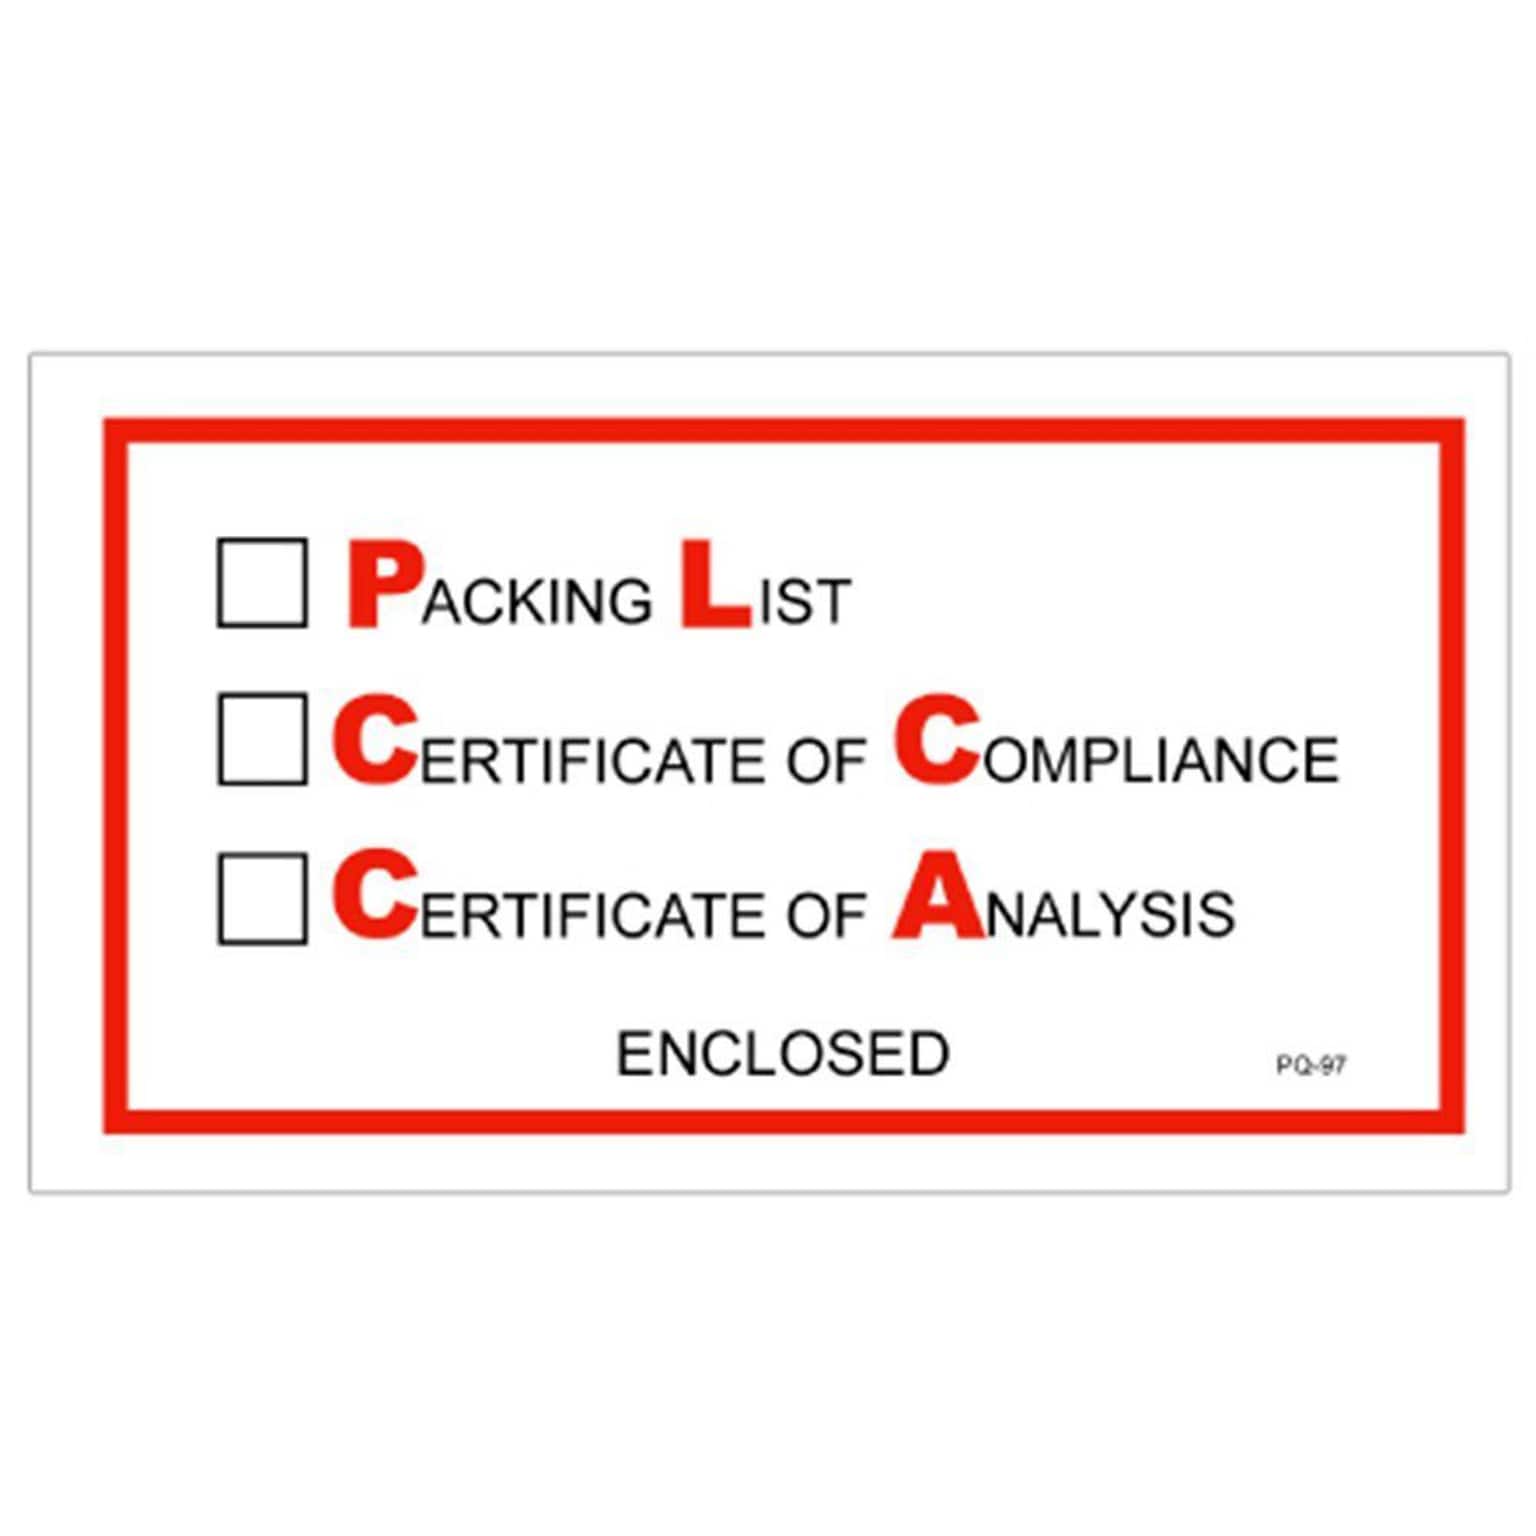 Quill Brand Packing List Envelope, 5.5 x 10, Red Full Face,Packing List/Cert of Compliance/Cert. of Analysis Enclosed  (PL97)